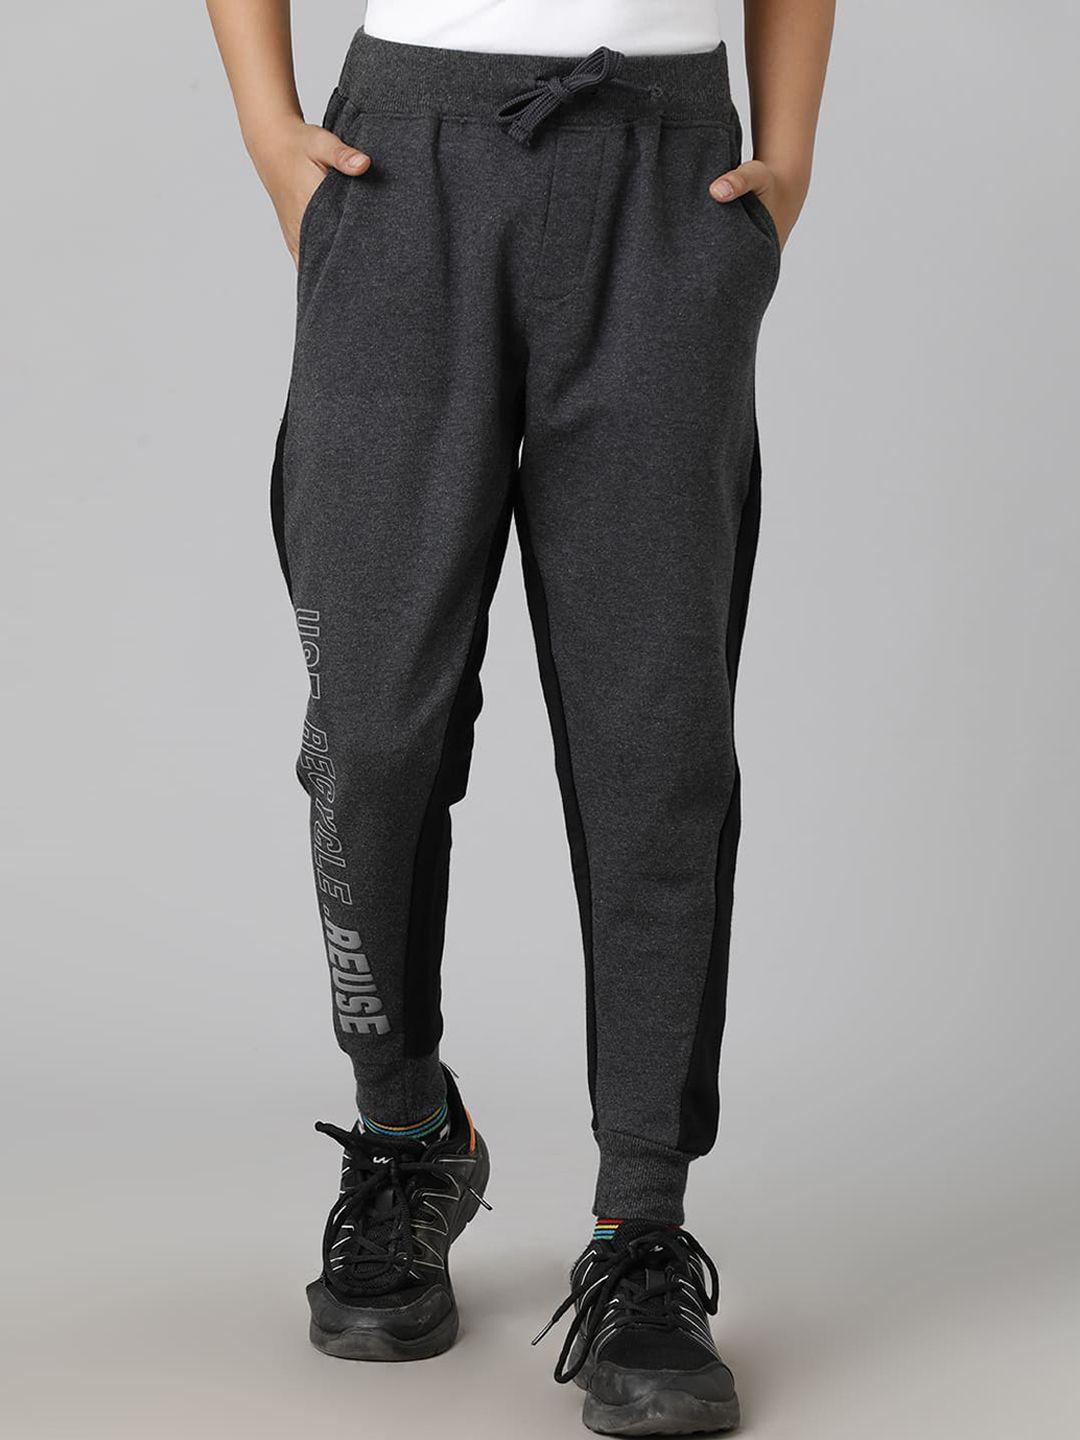 under-fourteen-only-boys-mid-rise-typography-printed-cotton-jogger-trousers